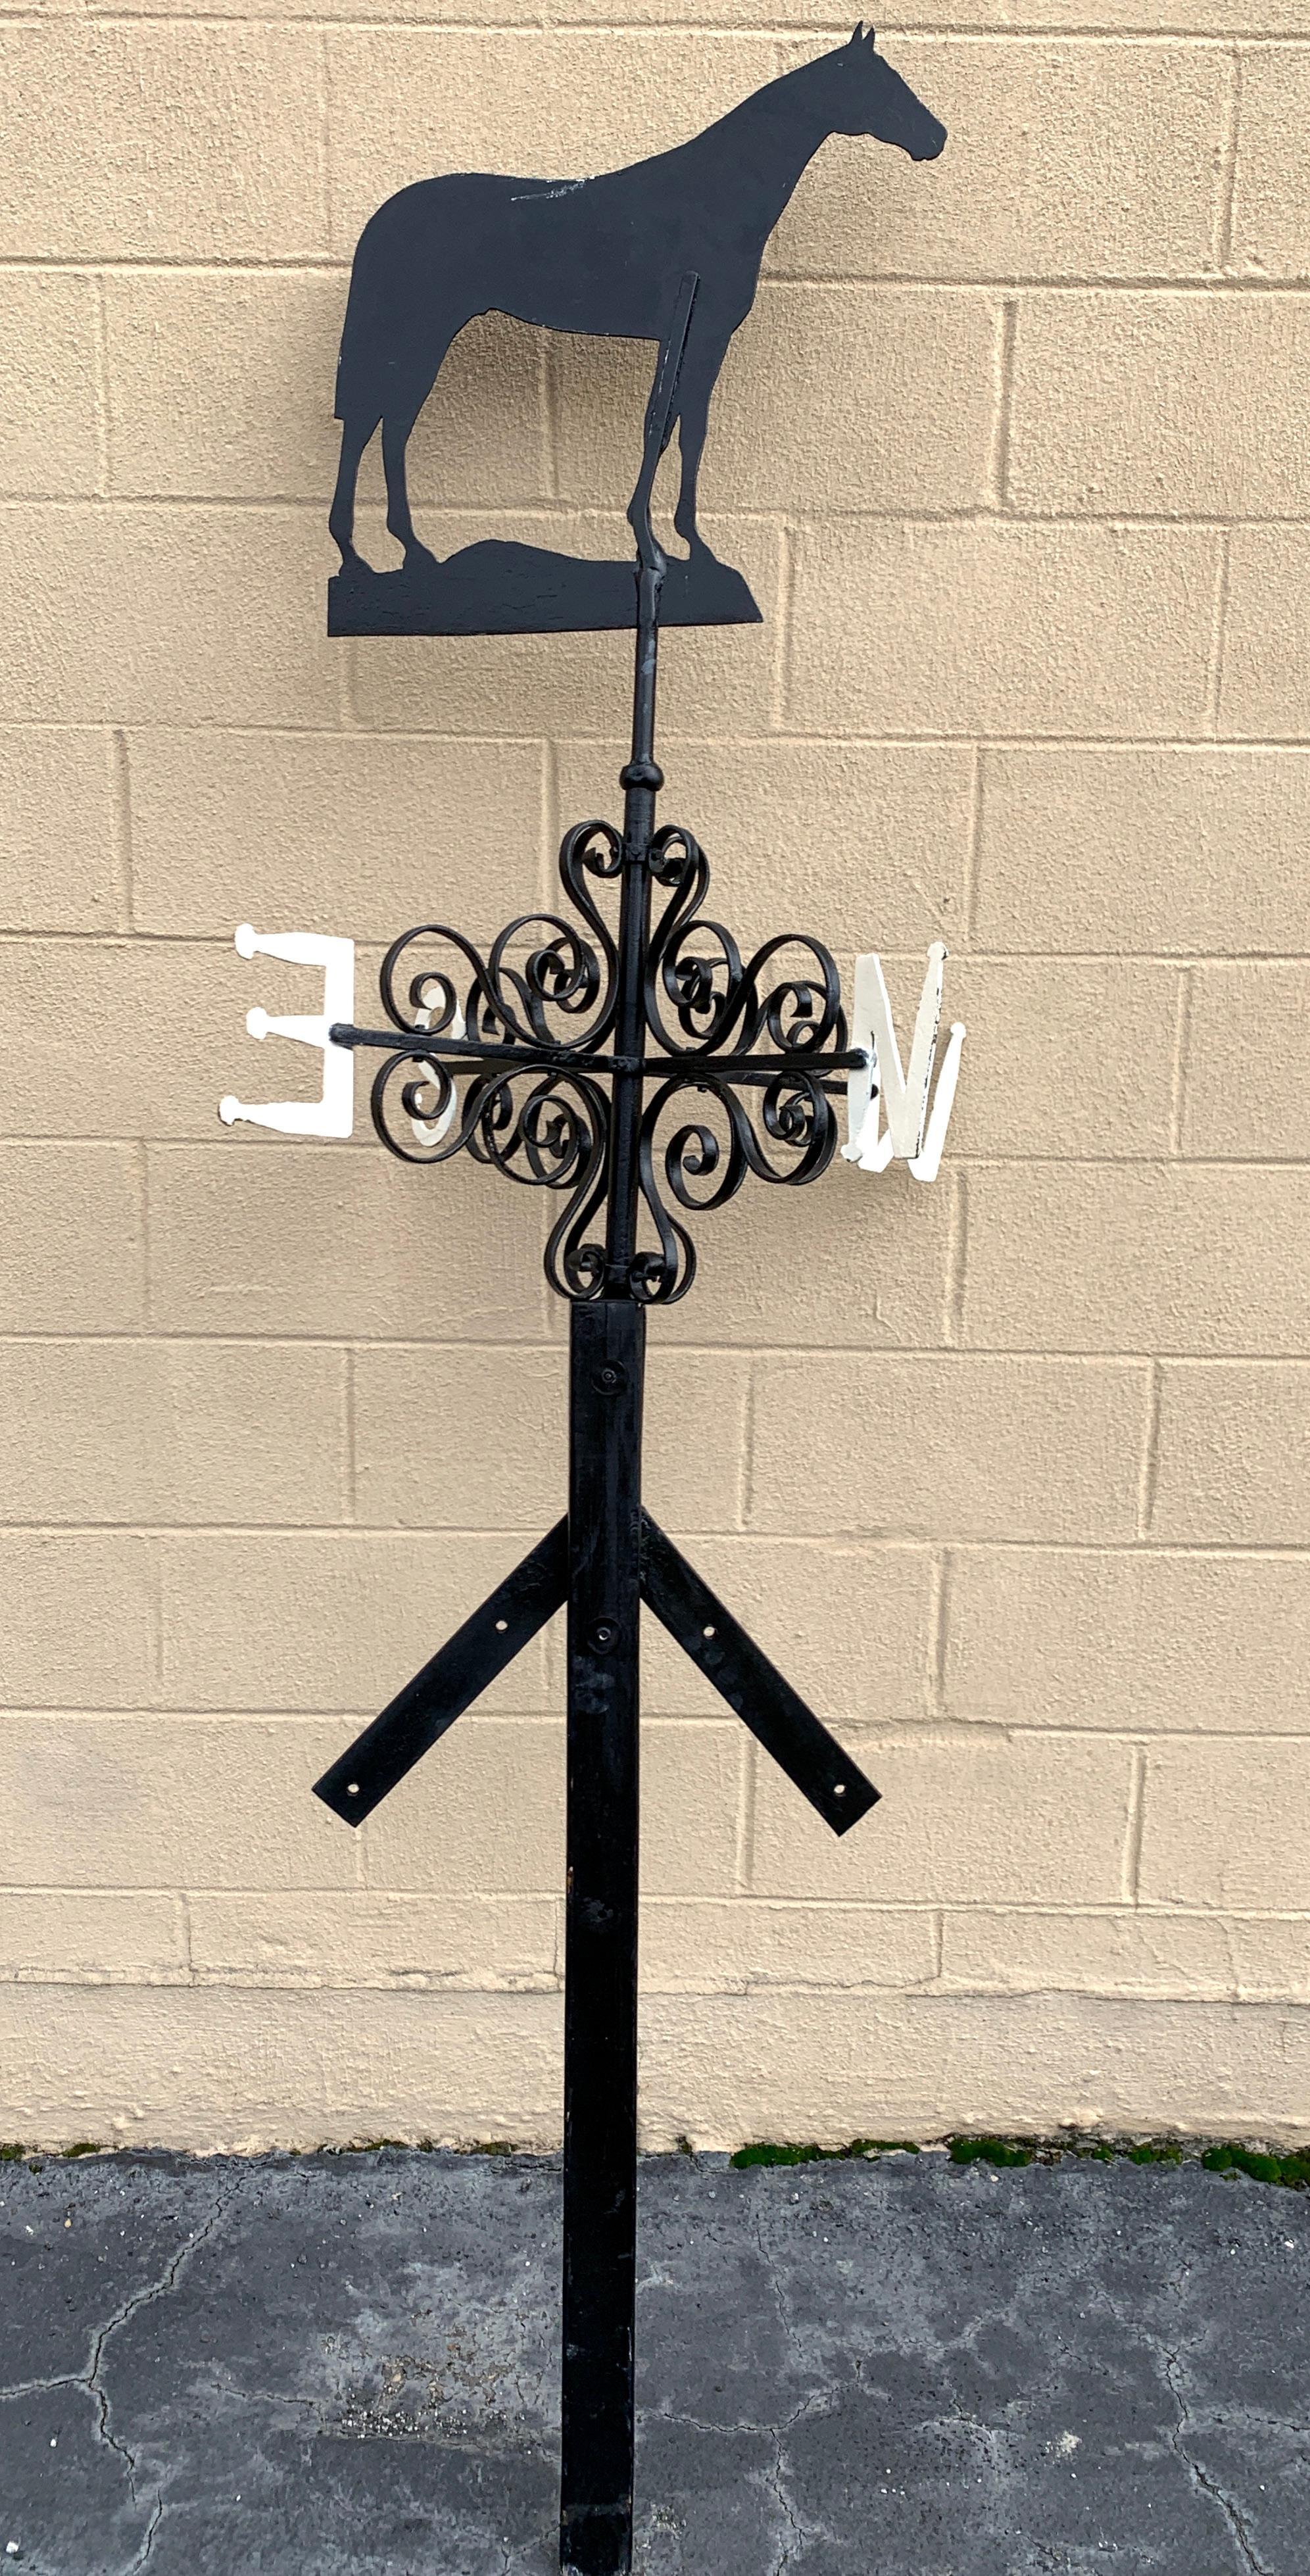 Antique American iron horse weathervane, Nashville TN, with moveable elaborate directional, mounted on a support base.
As shown on the support base stands 86